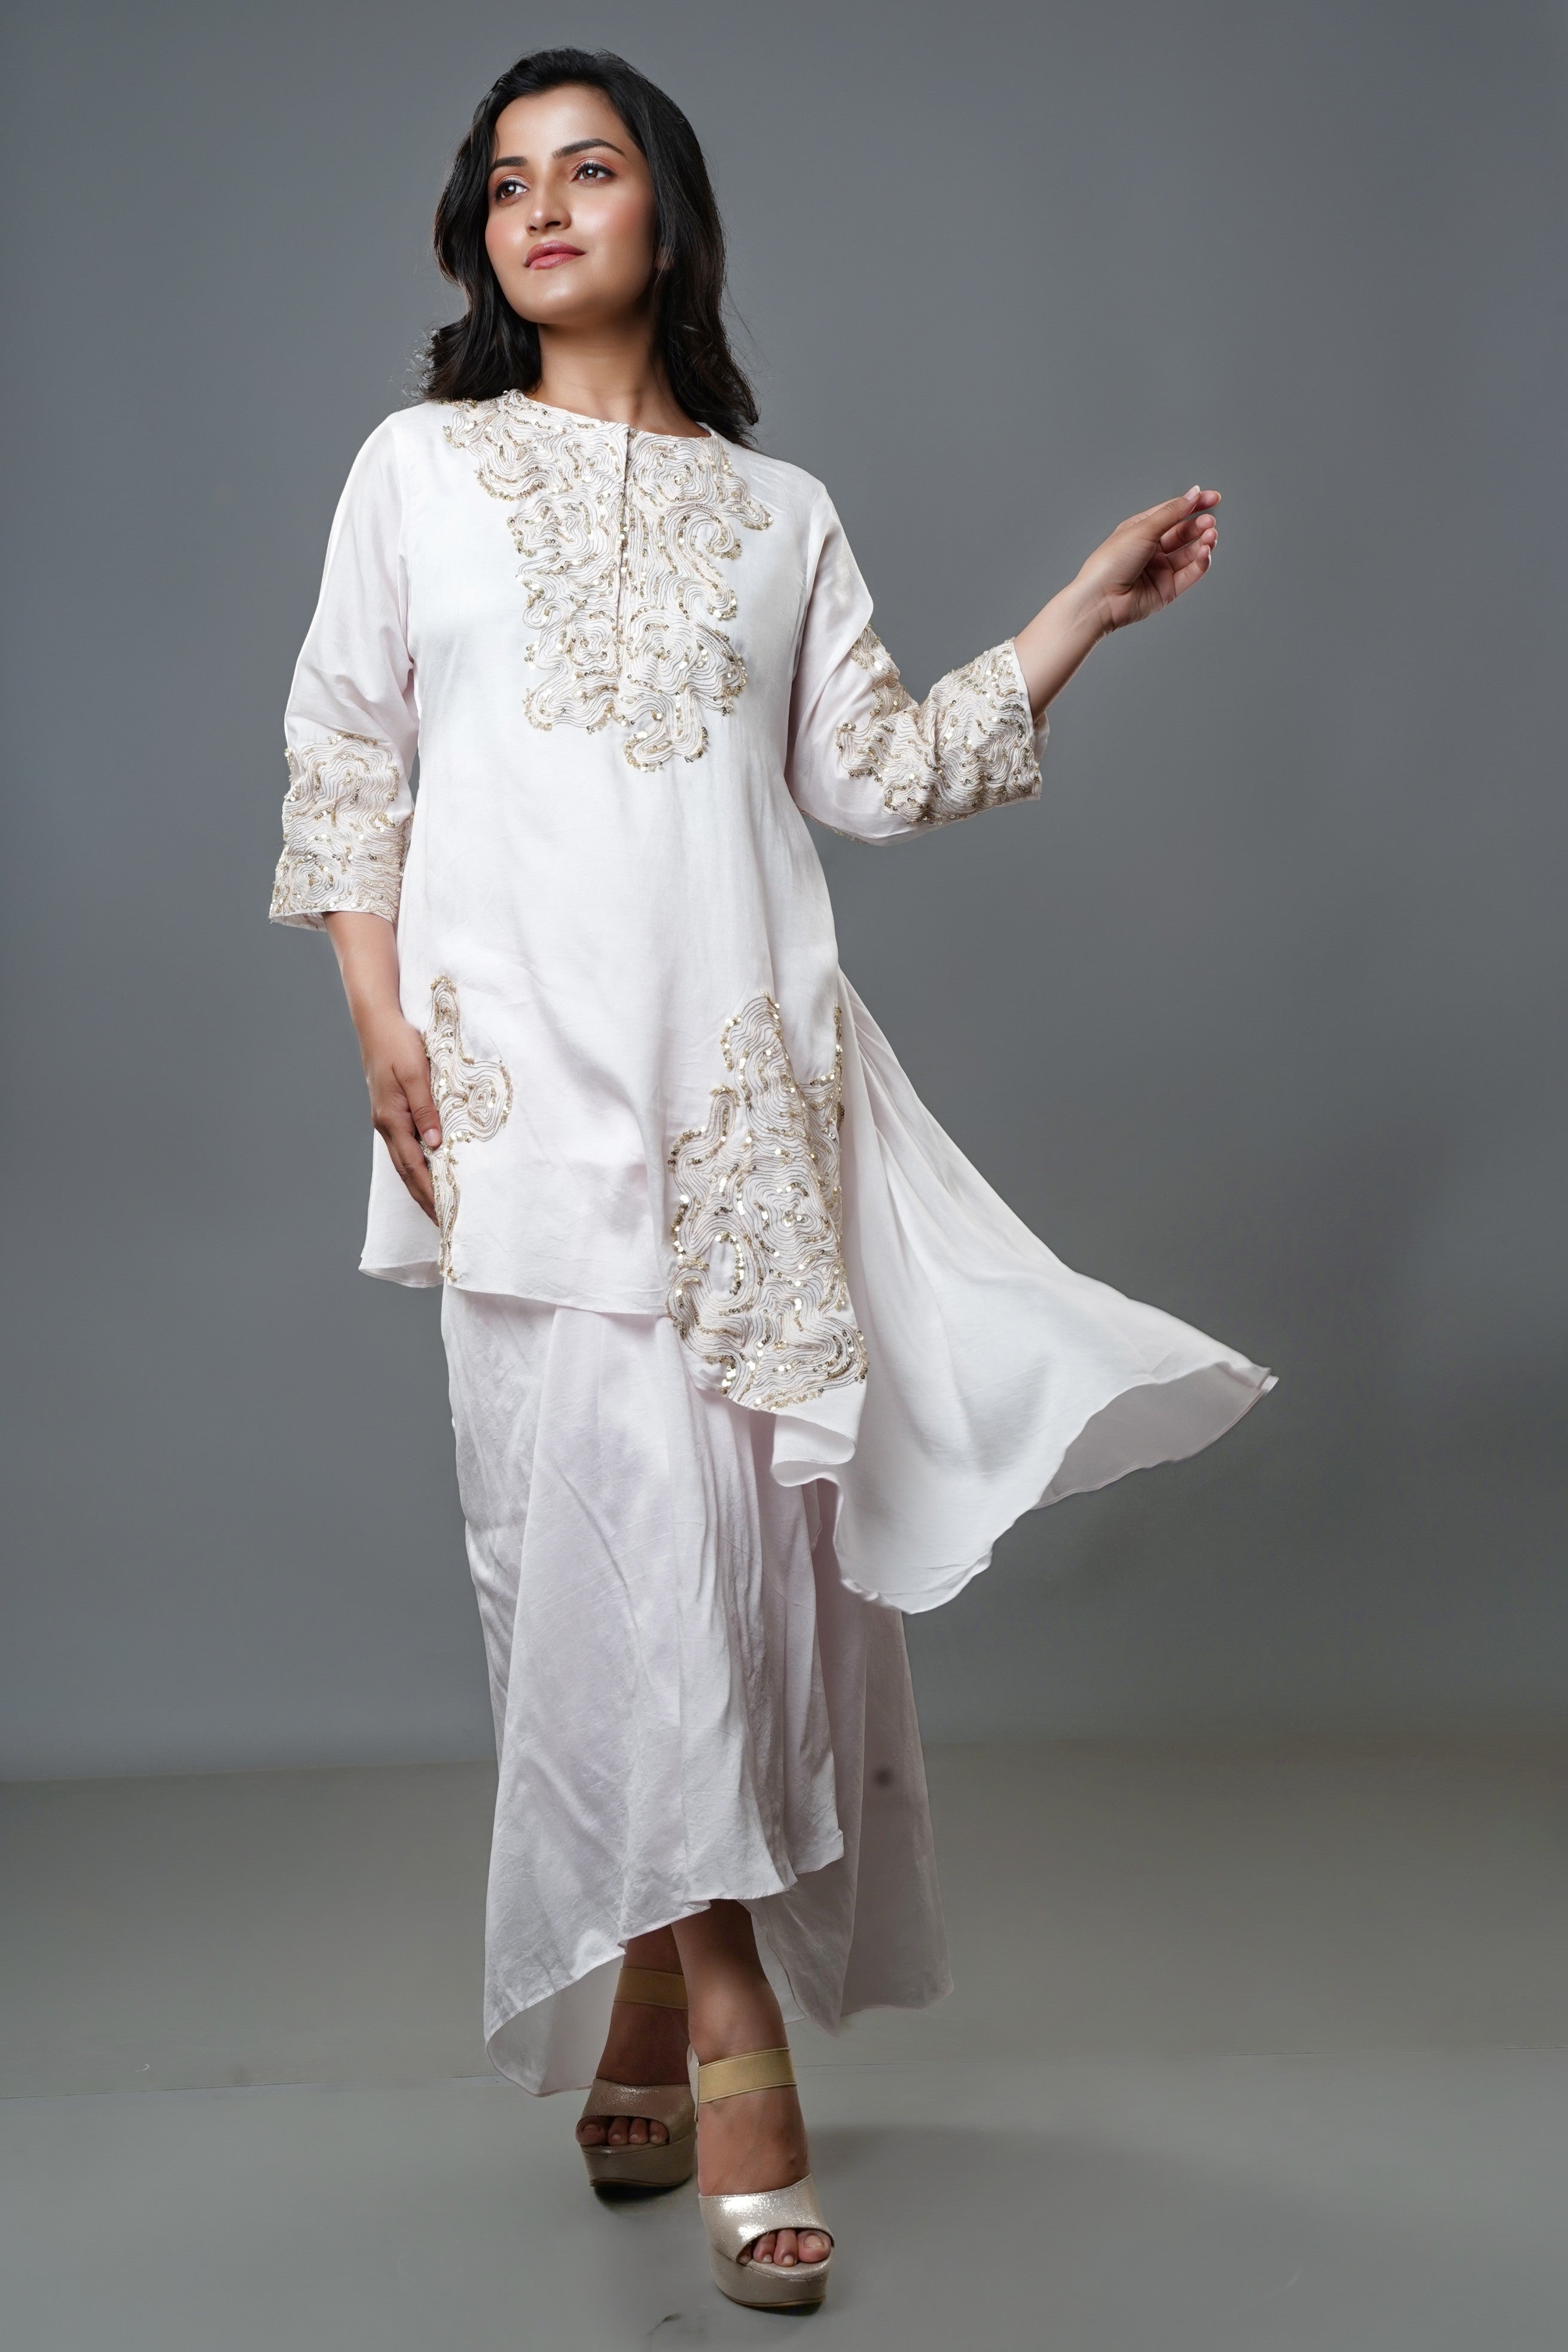 Embellished Top with Dhoti-Pattered Skirt - 1409